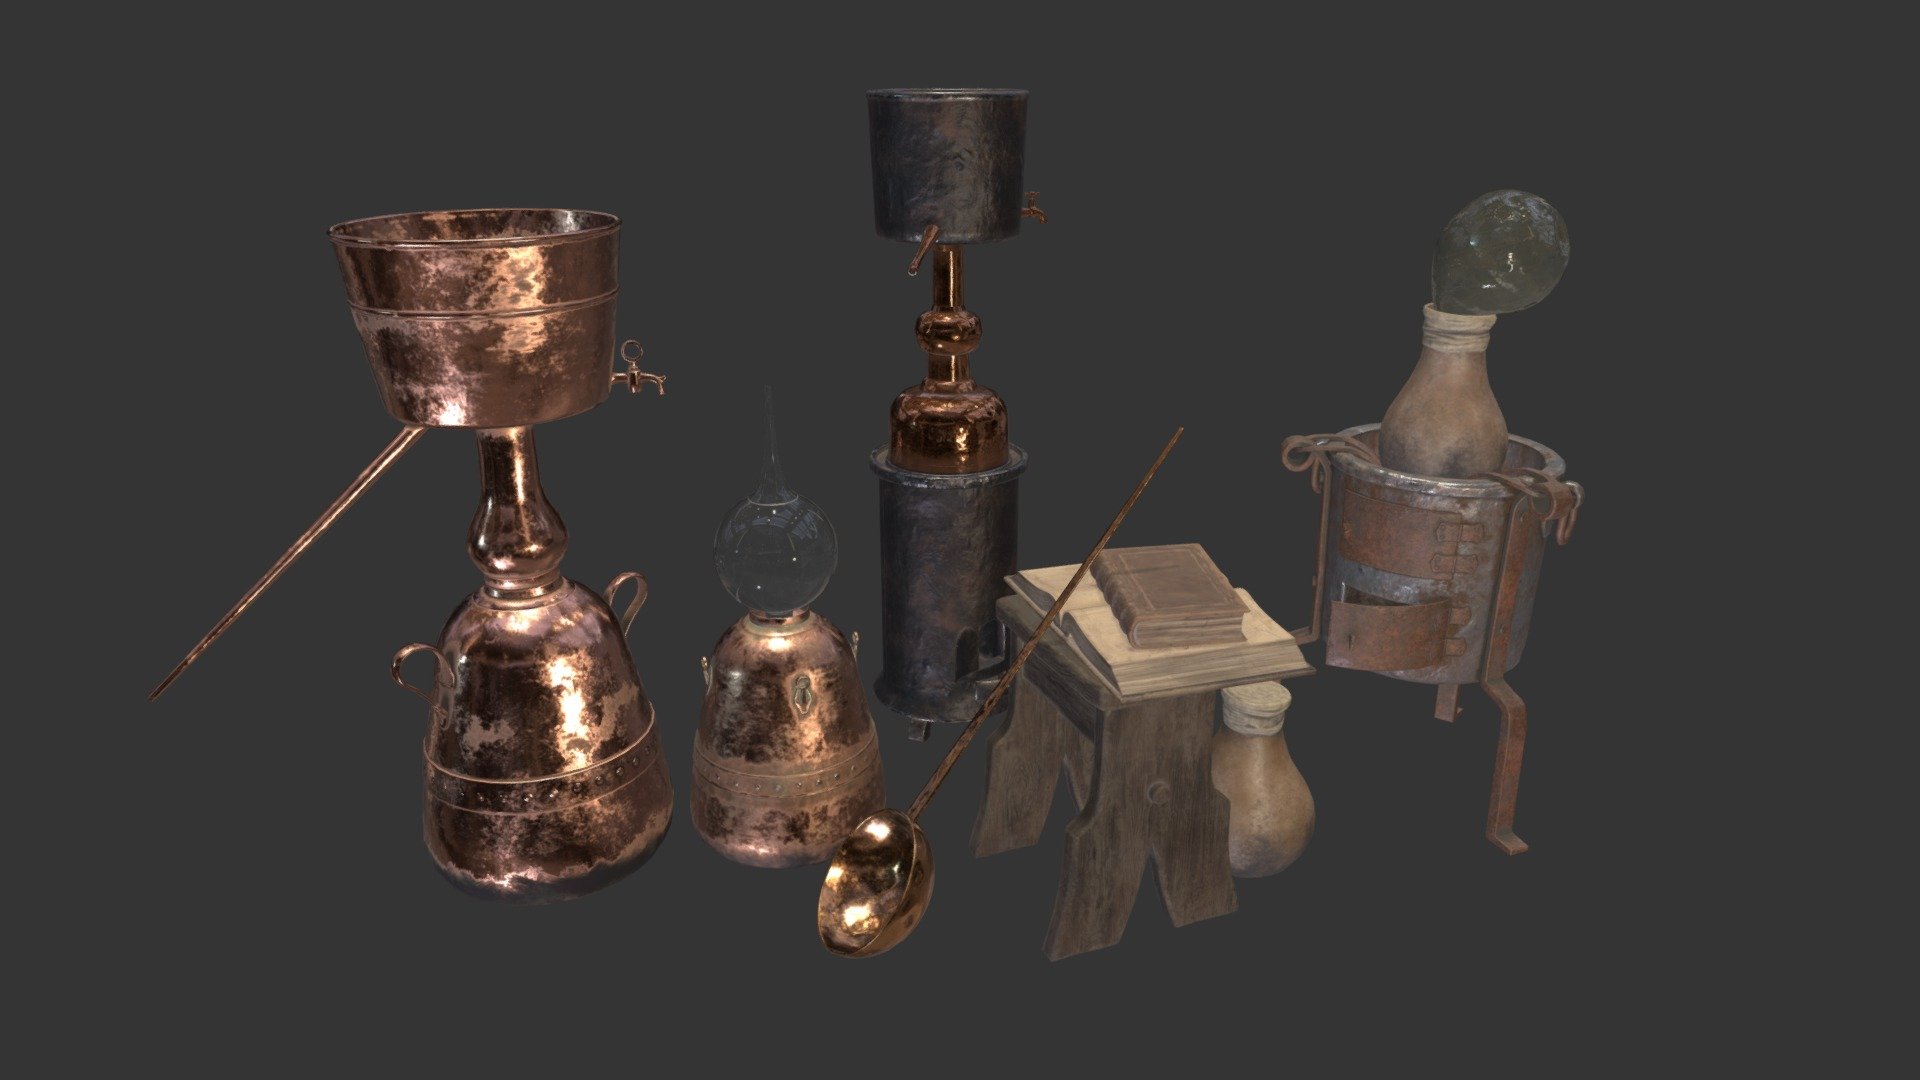 Photorealistic low poly alchemical things. Old paintings was used as references.

12 meshes and texture sets.

Texture resolution from 1024 to 4096 3d model